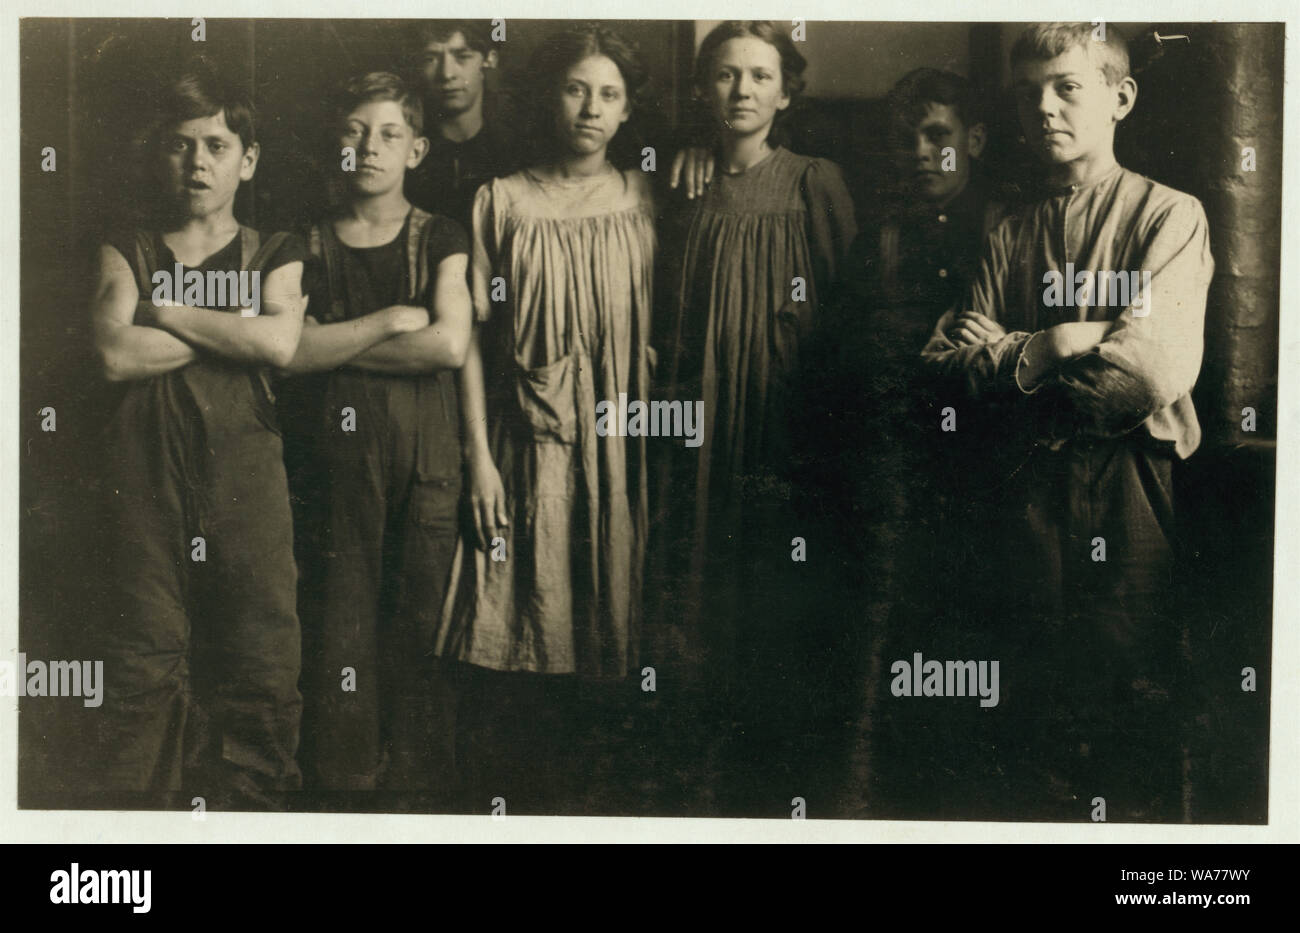 A few of the small girls and boys (not the smallest ones) that I found working in the spinning room of one of the Amoskeag Mfg. Co. mills at Manchester, N.H. Photo taken at 1:00 p.m., May 21, 1909, in hallway of spinning room. Many others there and in the other mills. Smallest boy (on left hand) is Geroge Brown, No. 1 Corporation. Corner of Granite and Bedford Sts. Next is, Eugene Lamy, 16 Marion St. Girls: Melvina Proulx, 145 Cartier St. Laura Oclair, 145 Cartier St. Abstract: Photographs from the records of the National Child Labor Committee (U.S.) Stock Photo